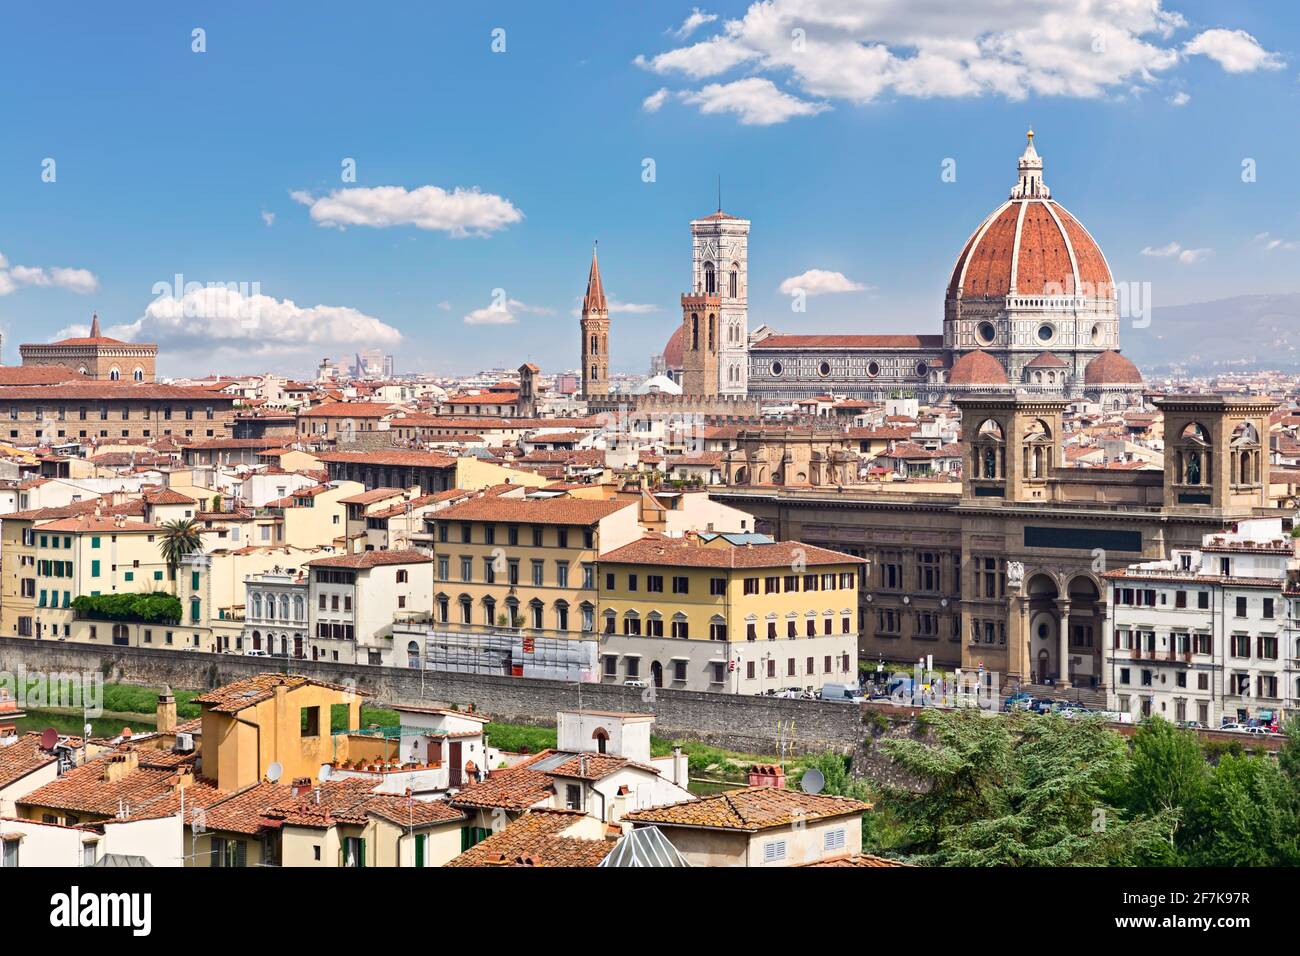 Italy, Toscana, Florence. General view of the city. Cathedral Santa Maria del Fiore. Towers of National Museum of the Bargello and Badia Florentina Stock Photo